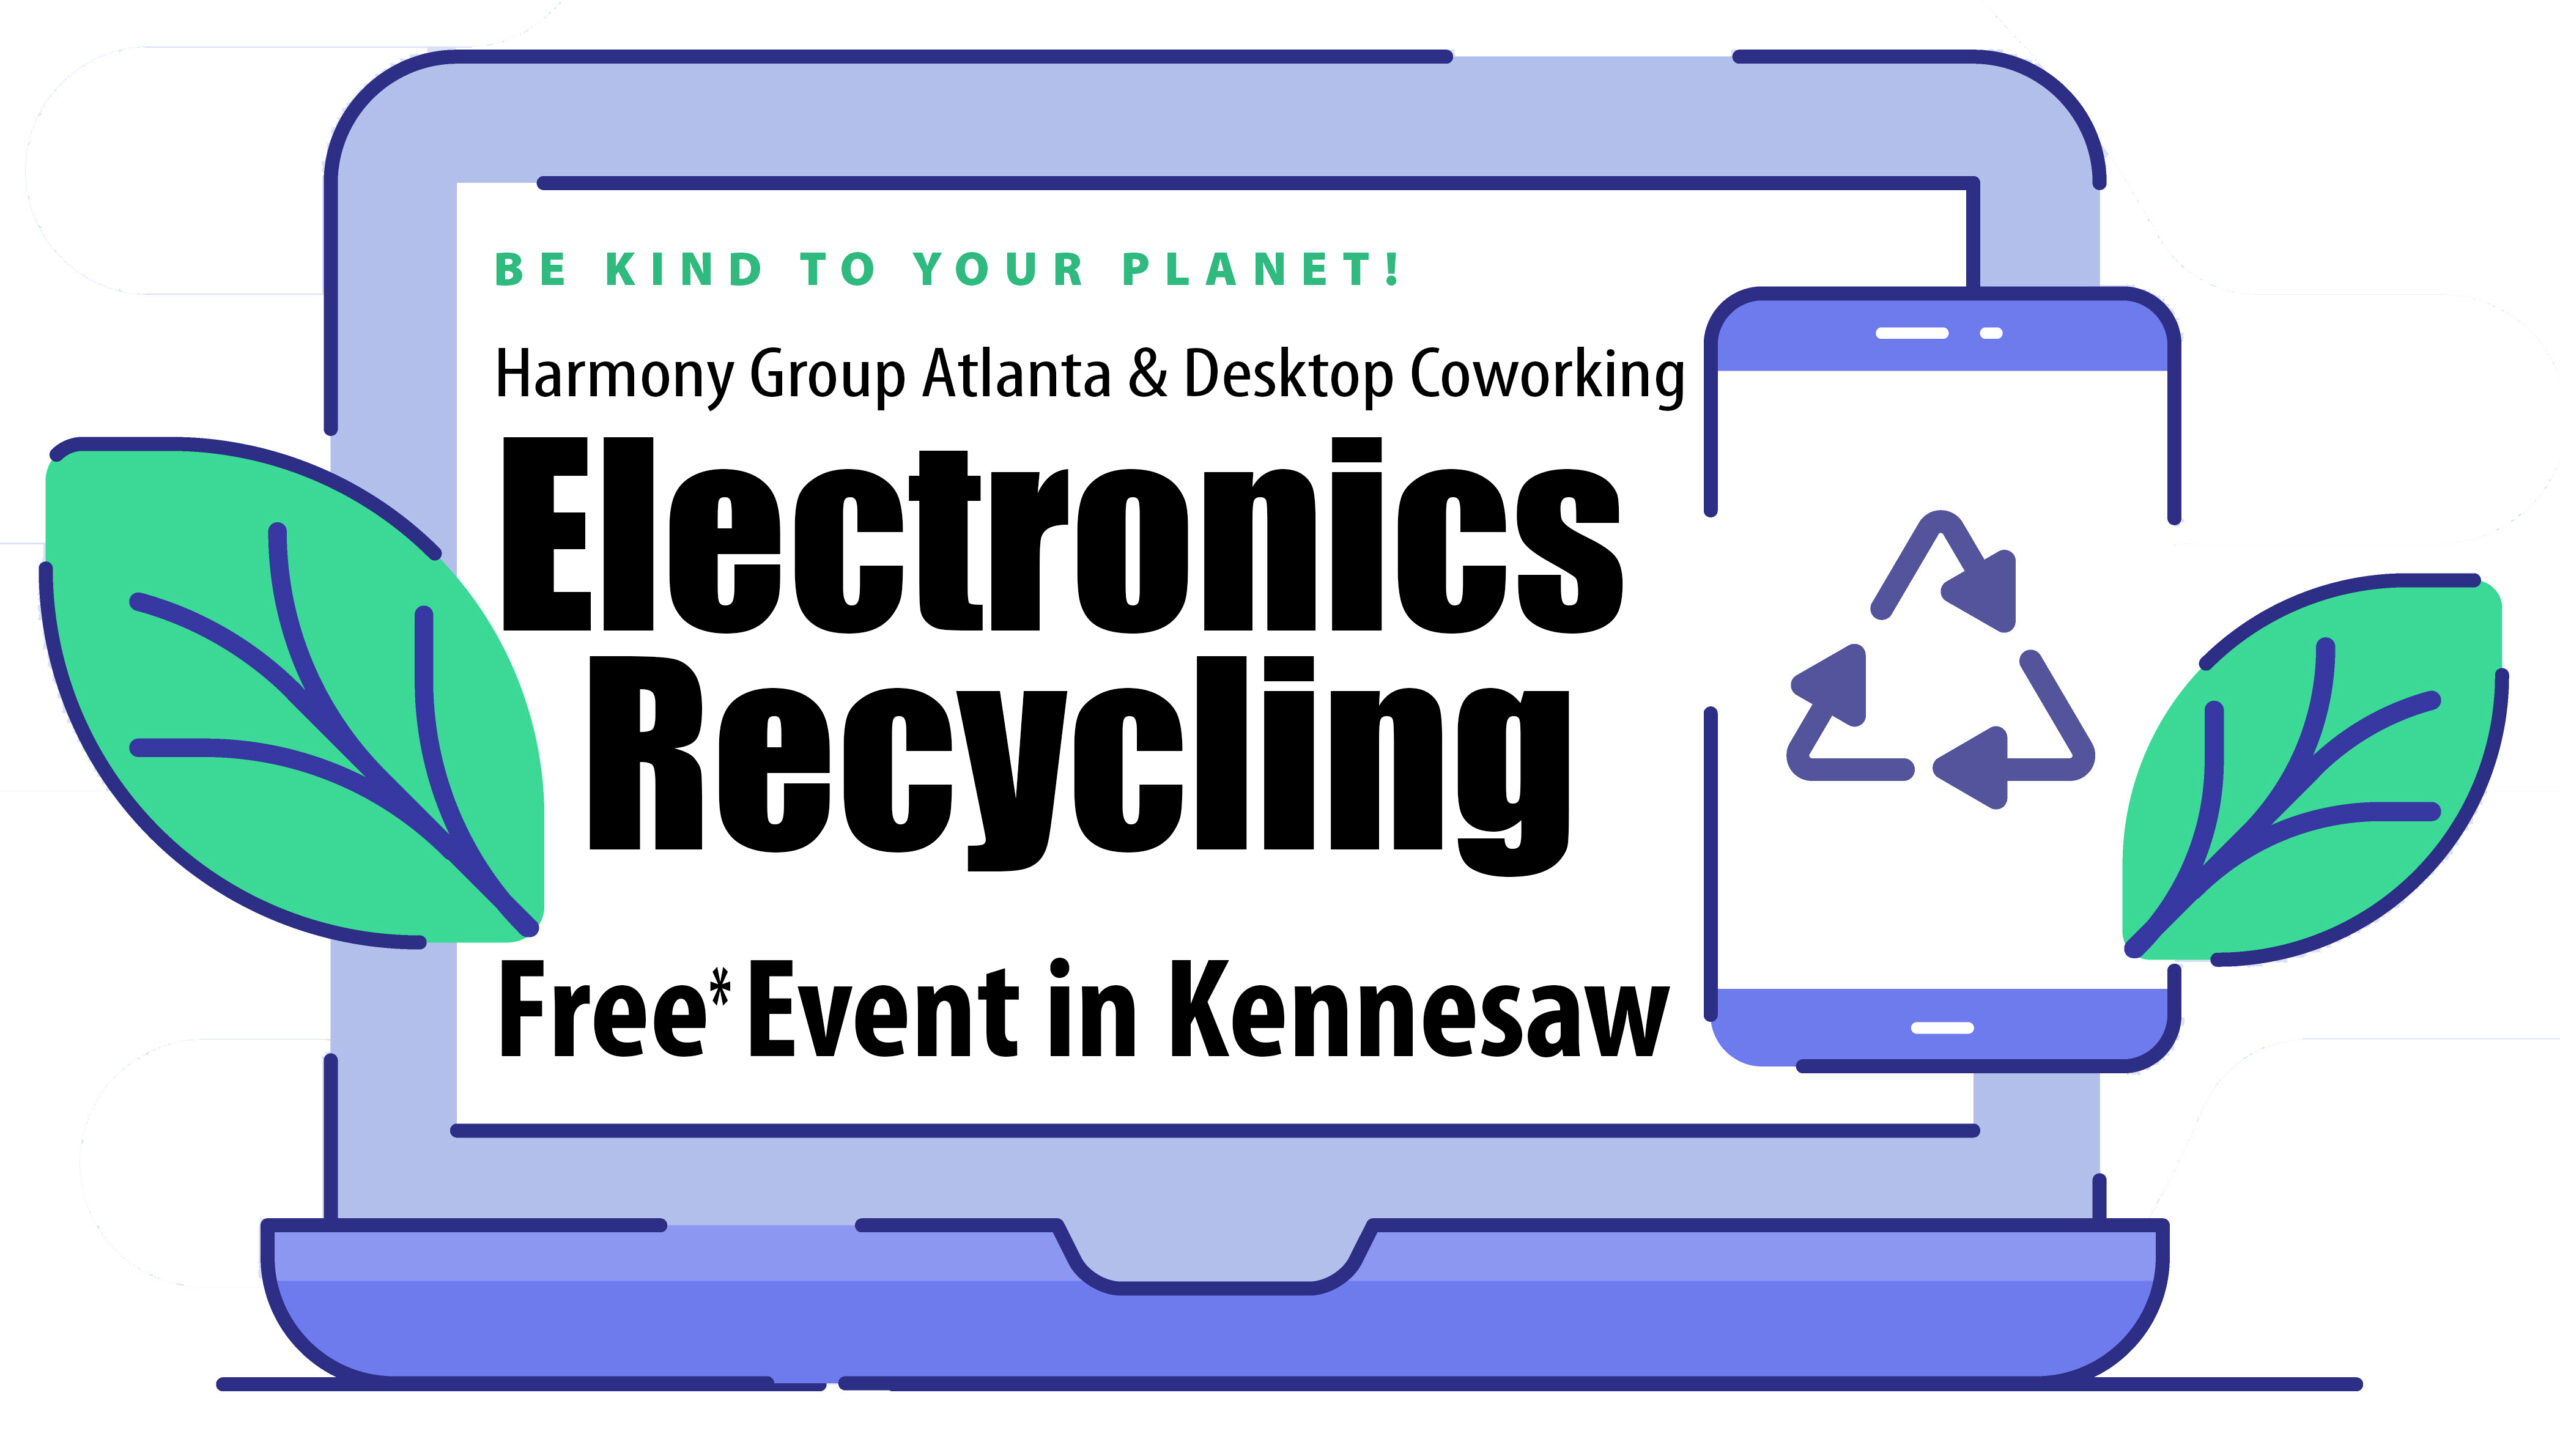 Be Kind To Your Planet Harmony Group Atlanta Desktop Coworking Electronics Recycling Free Event in Kennesaw